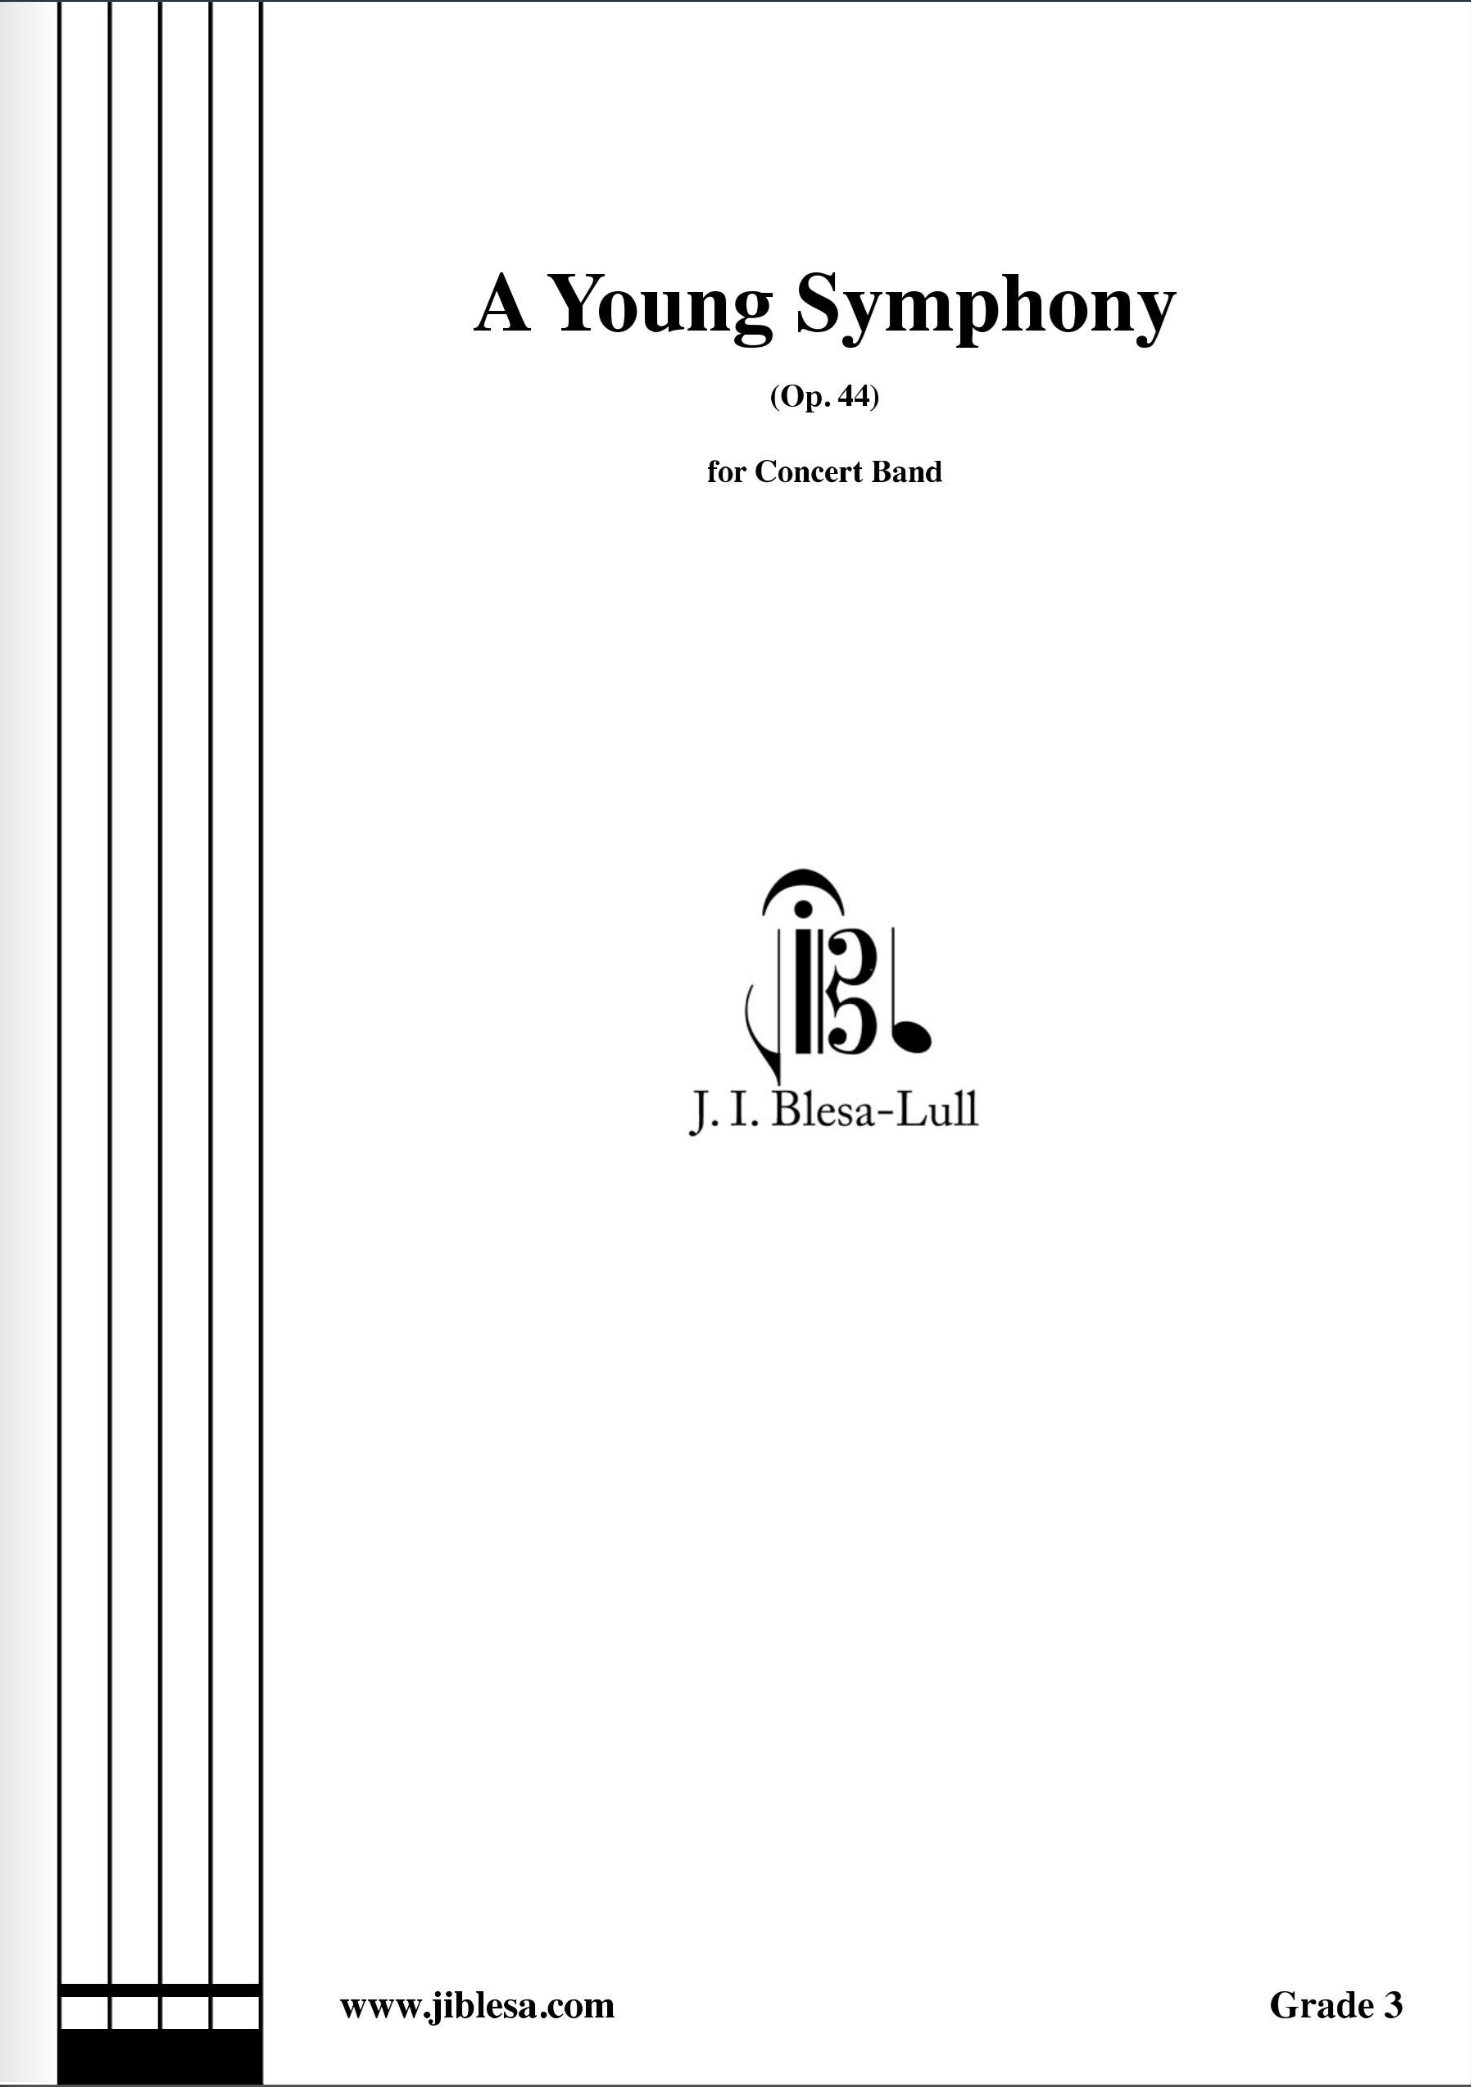 A Young Symphony (Score Only) by Jose Ignacio Blesa-Lull